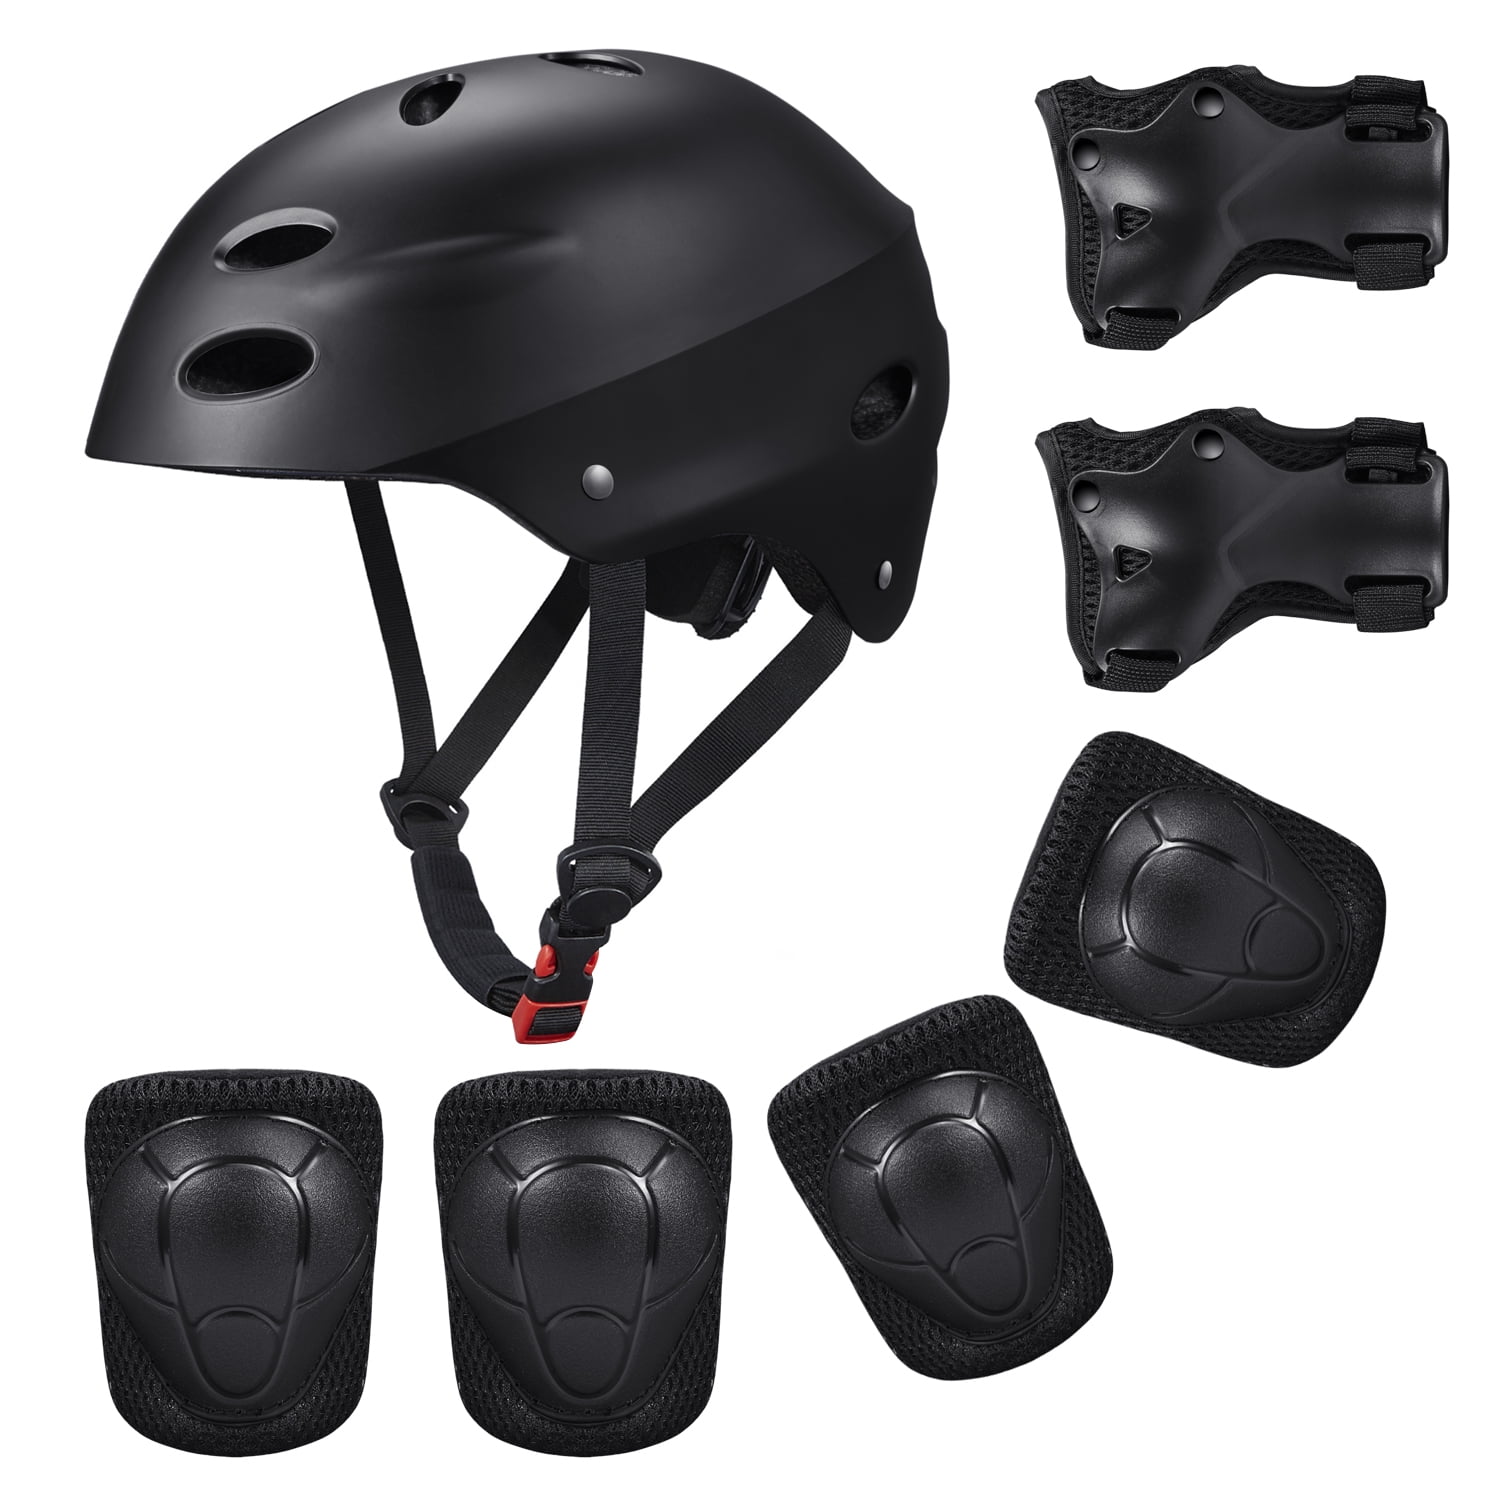 Kids Safety Full Face Helmet for Bike Scooter Bicycle Skate Board Cycle UK 